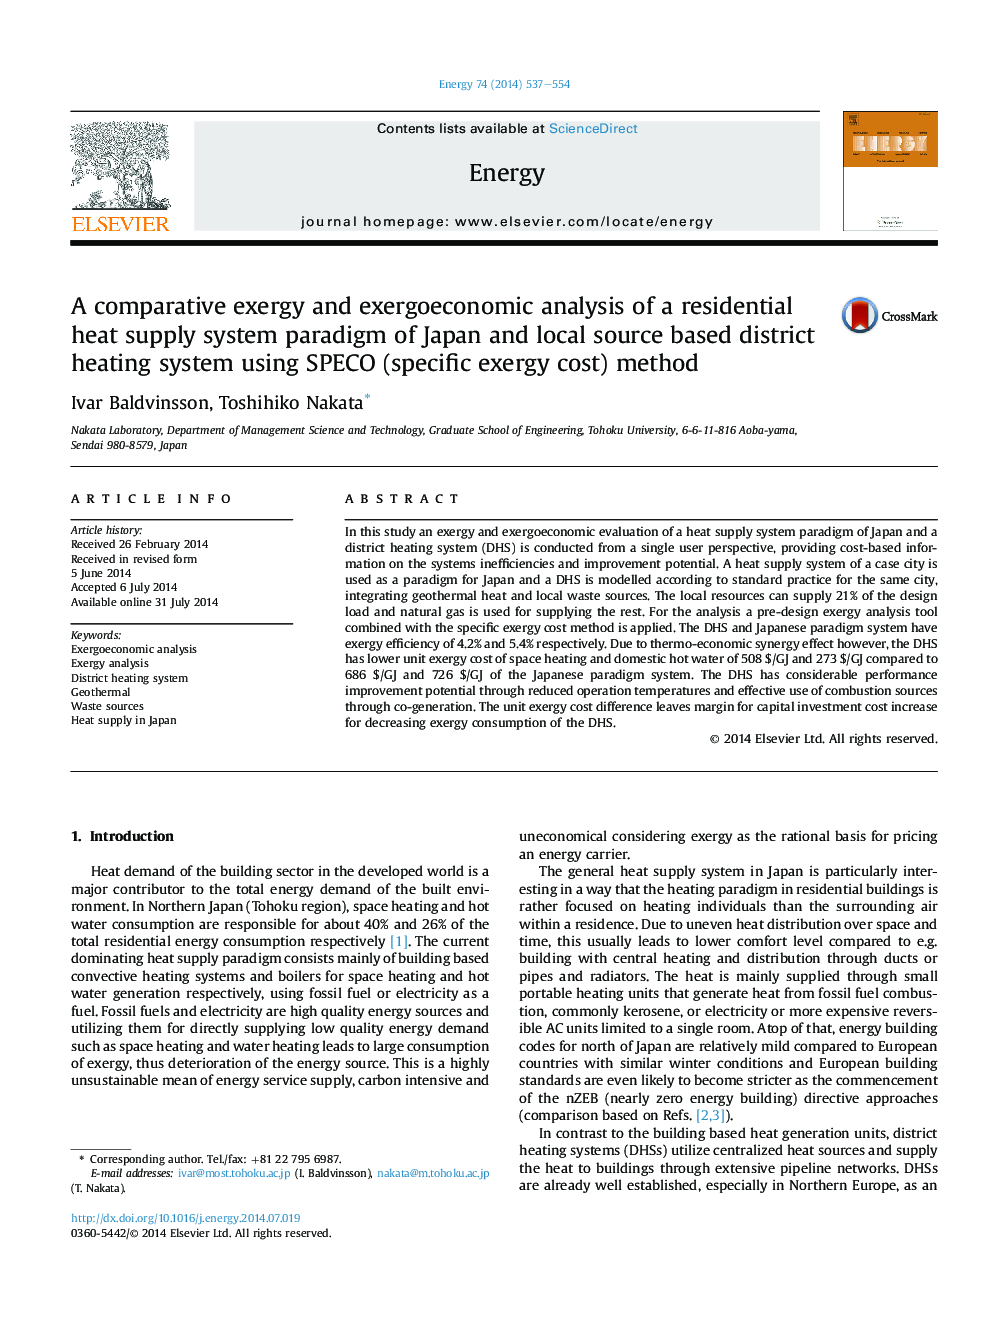 A comparative exergy and exergoeconomic analysis of a residential heat supply system paradigm of Japan and local source based district heating system using SPECO (specific exergy cost) method